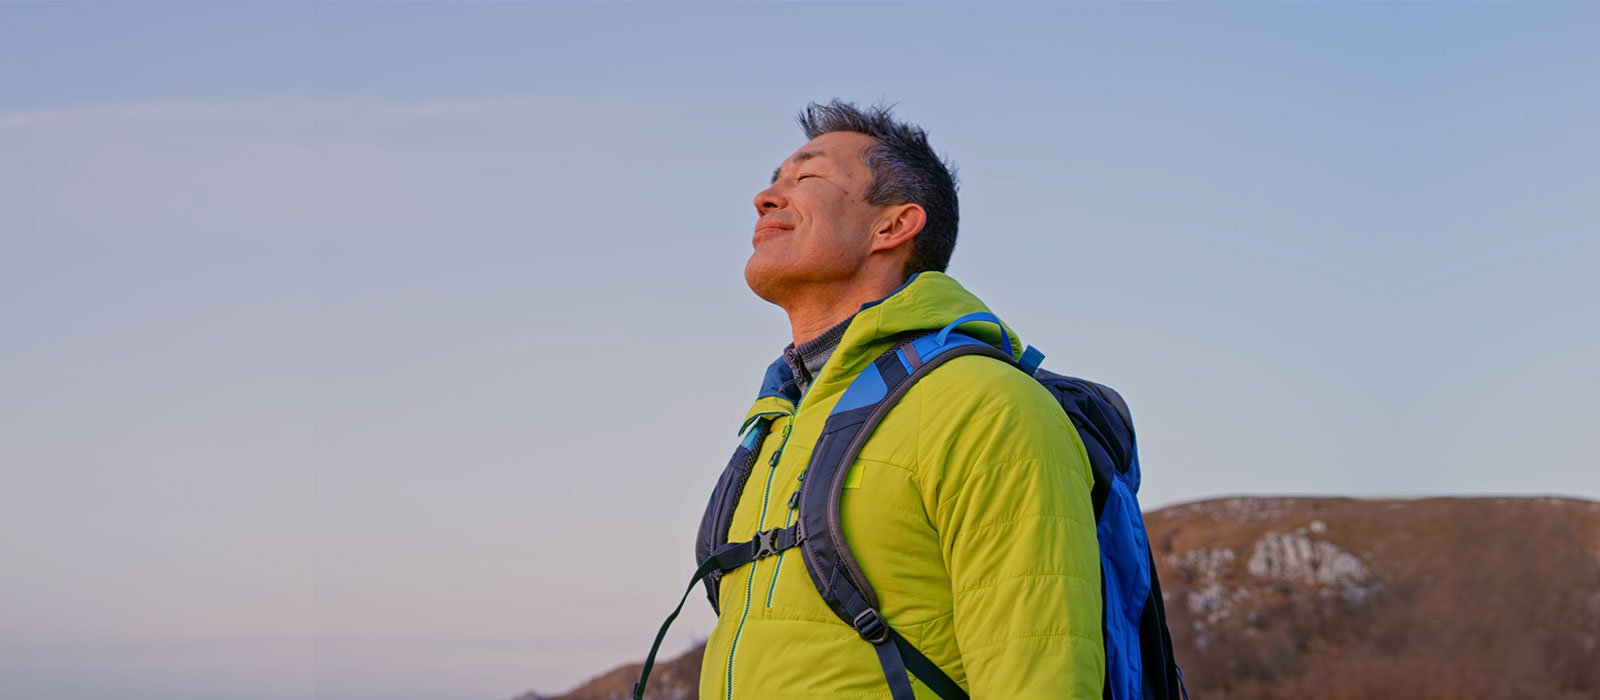 Grateful man breathing deeply on top of mountain